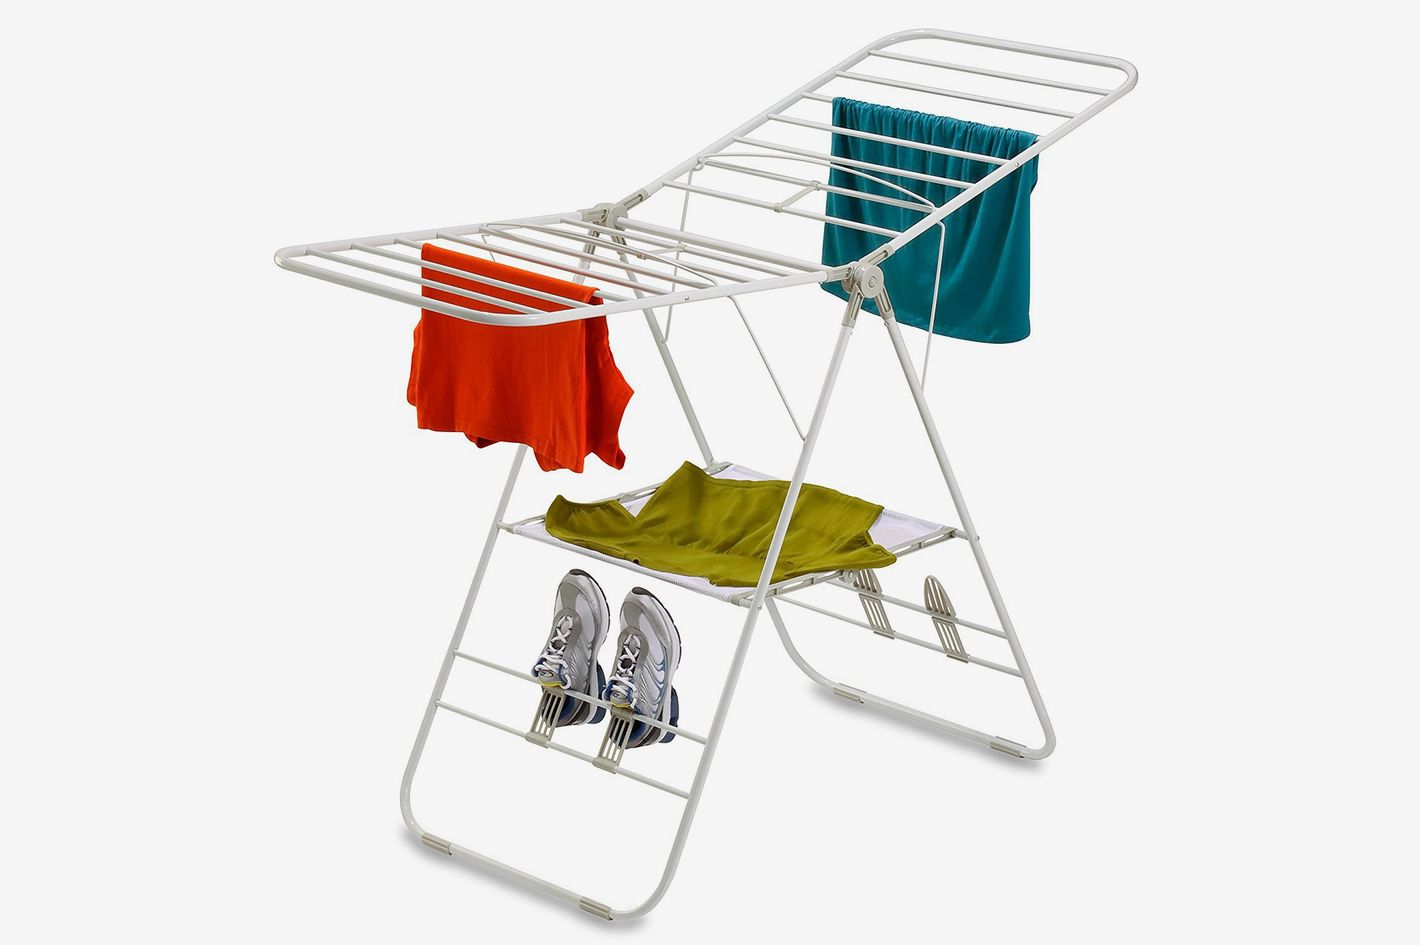 Indoor Clothes Horse Washing Dryer Stand Thick Wires Compact Folding Airer New 